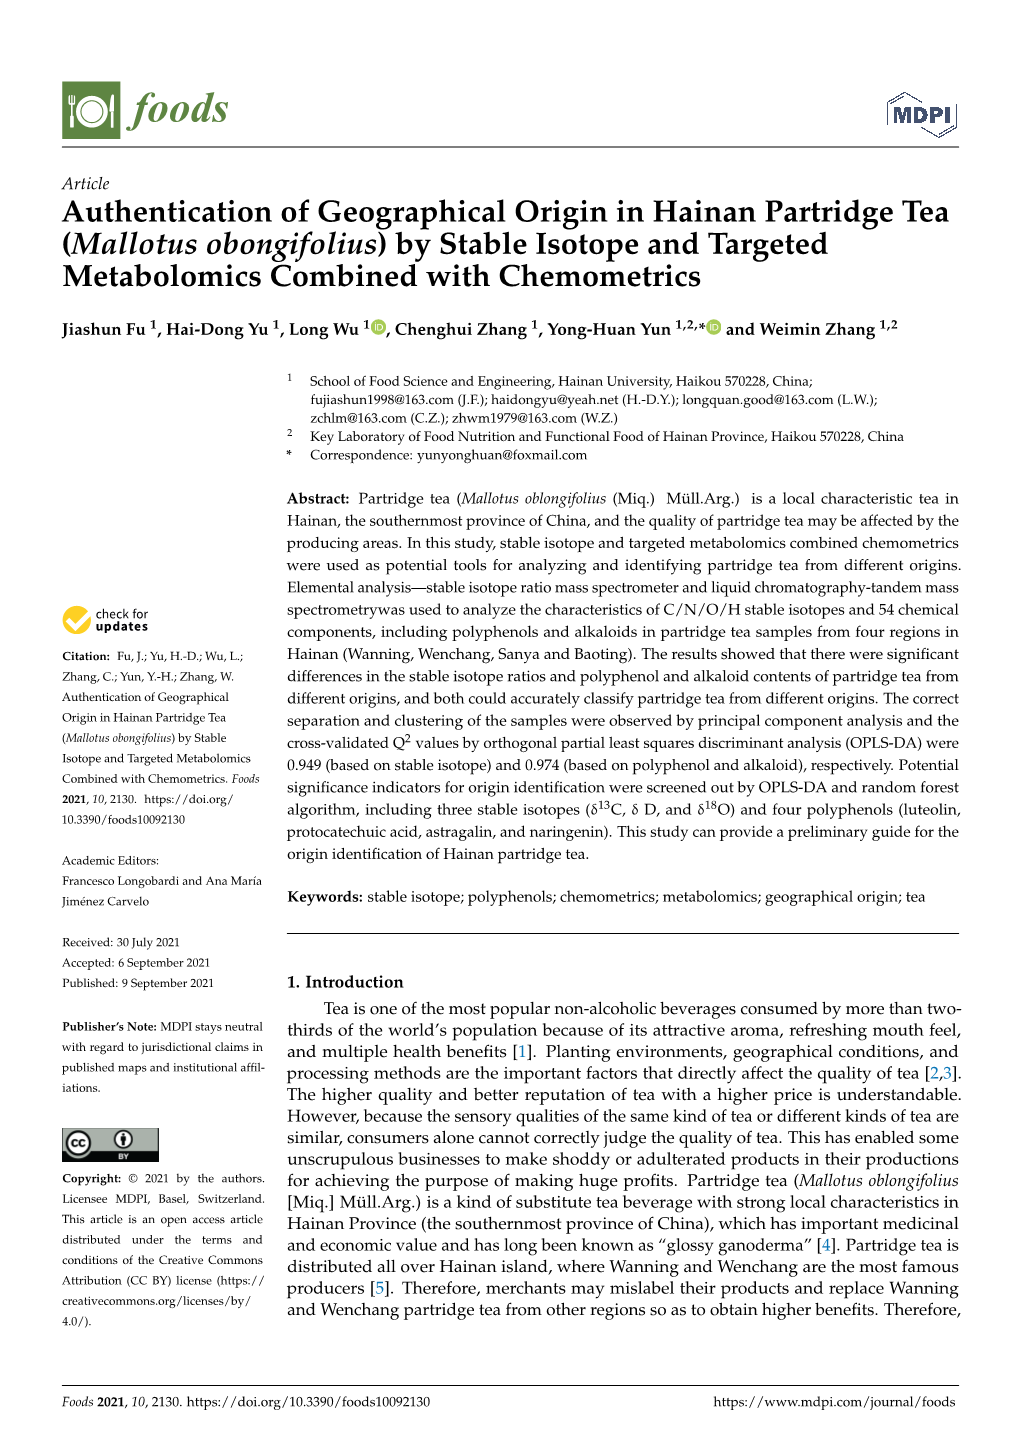 Authentication of Geographical Origin in Hainan Partridge Tea (Mallotus Obongifolius) by Stable Isotope and Targeted Metabolomics Combined with Chemometrics